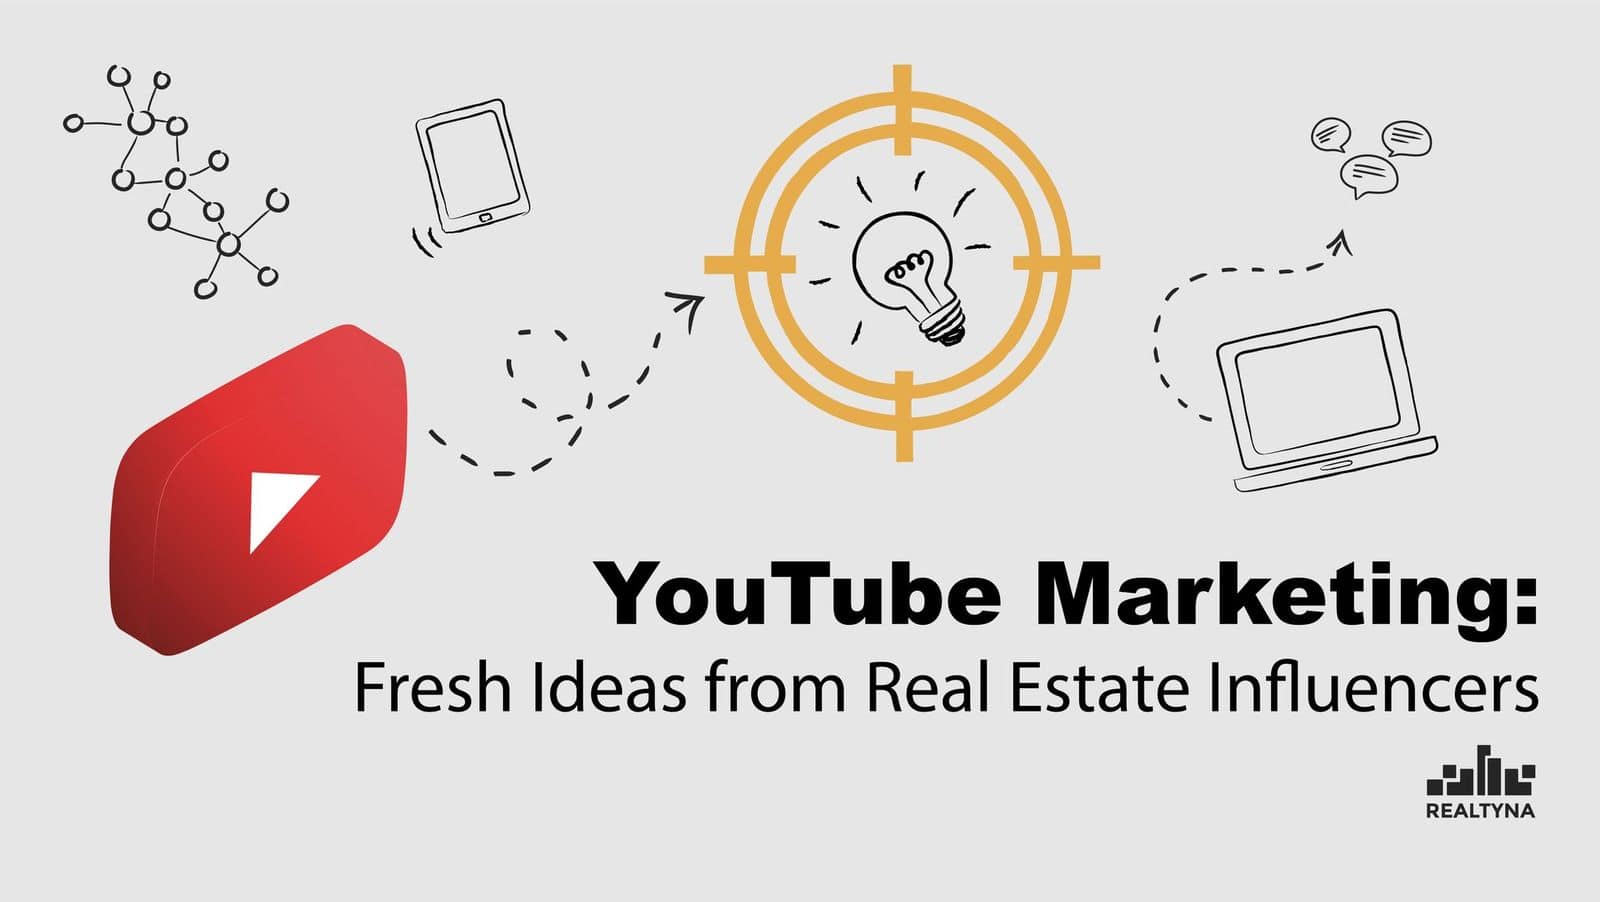 YouTube Marketing: Fresh Ideas from Real Estate Influencers